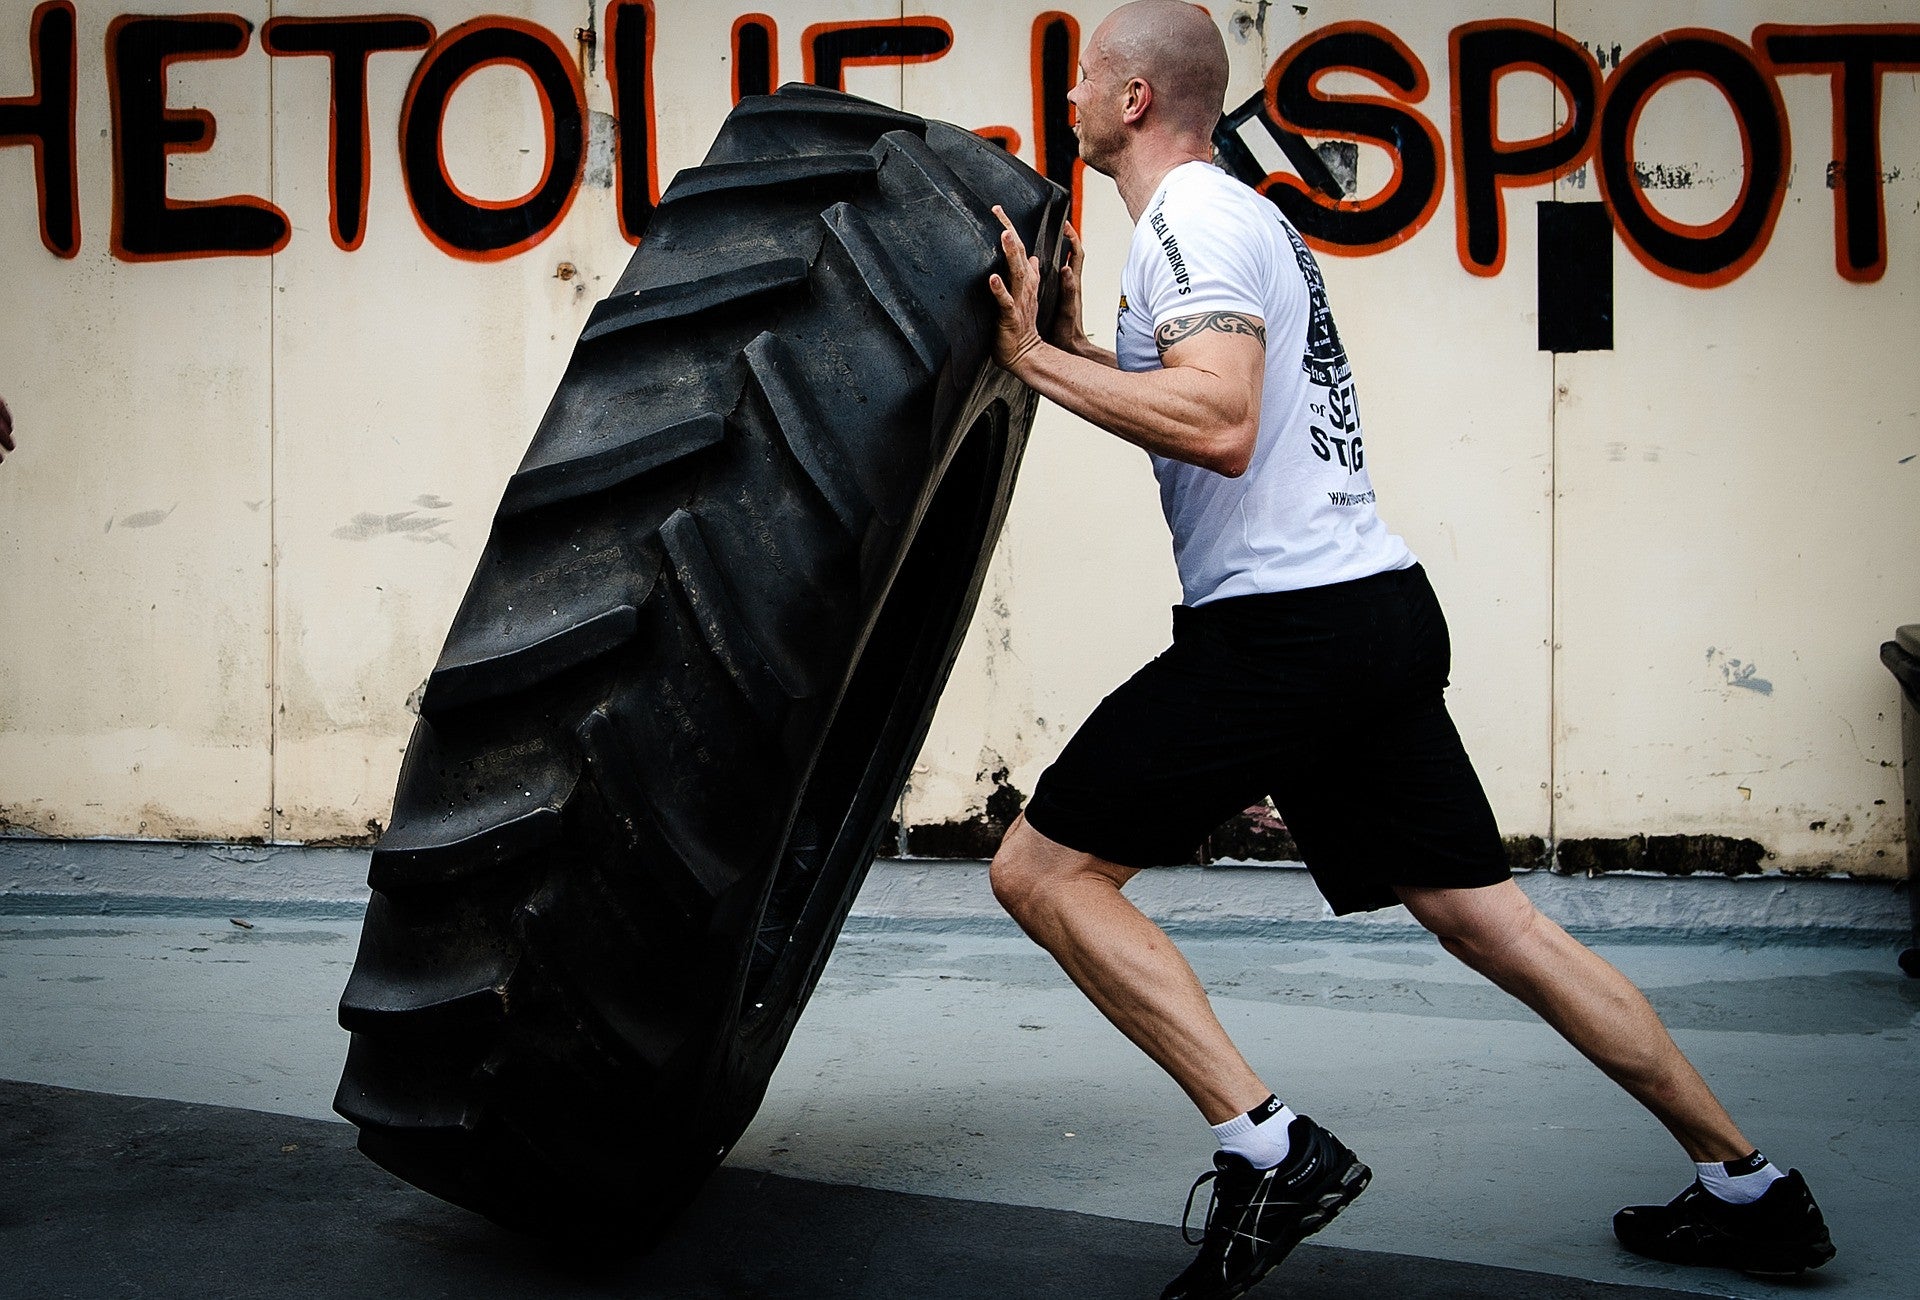 Top 4 CrossFit Exercises for Beginners